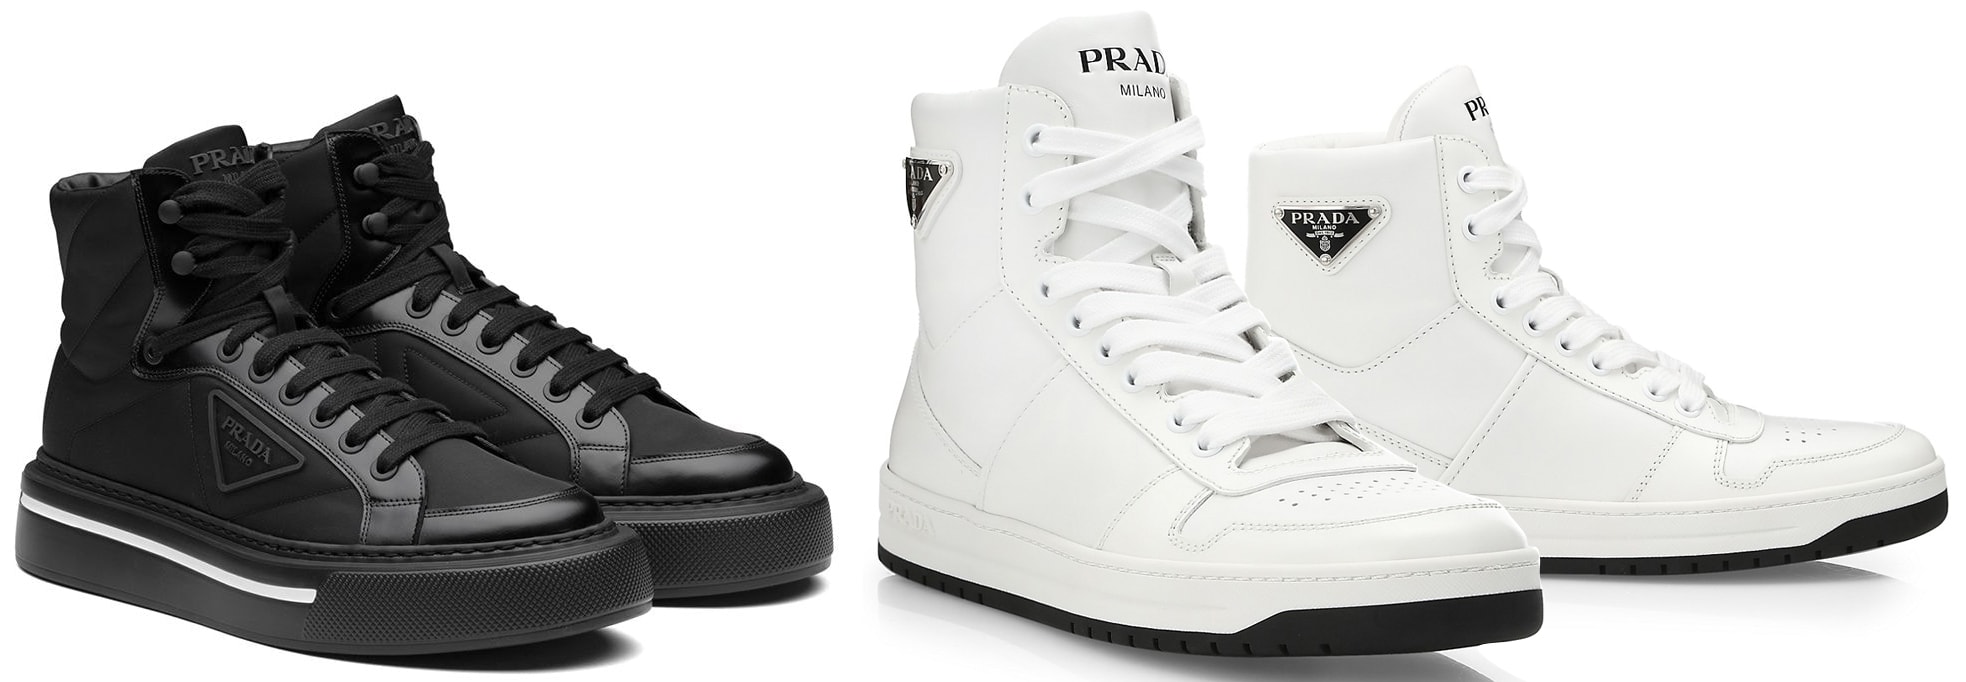 Prada's sneakers often feature premium materials, including high-quality leather and nylon, and they are characterized by their sleek and minimalistic design